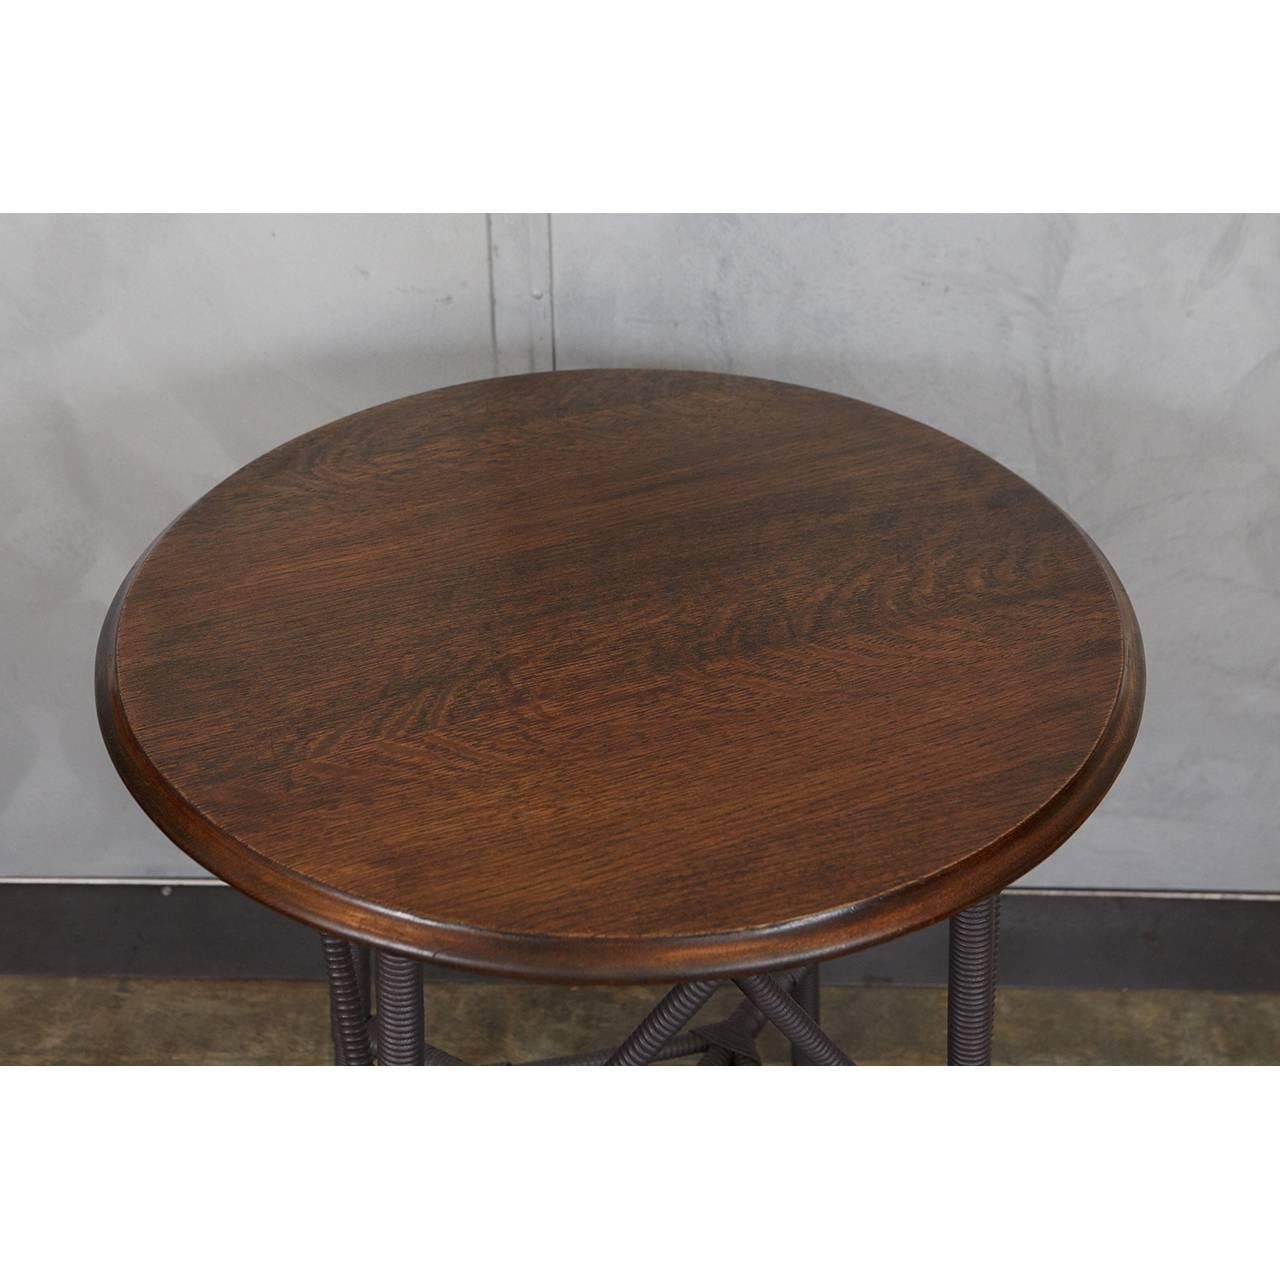 This wood and wicker table with a round oak top is a very special piece. The legs
are intricately turned to mimic the wicker pattern with wicker wrapping on the bottom portion. Note the nice design of the angled side supports and lower box